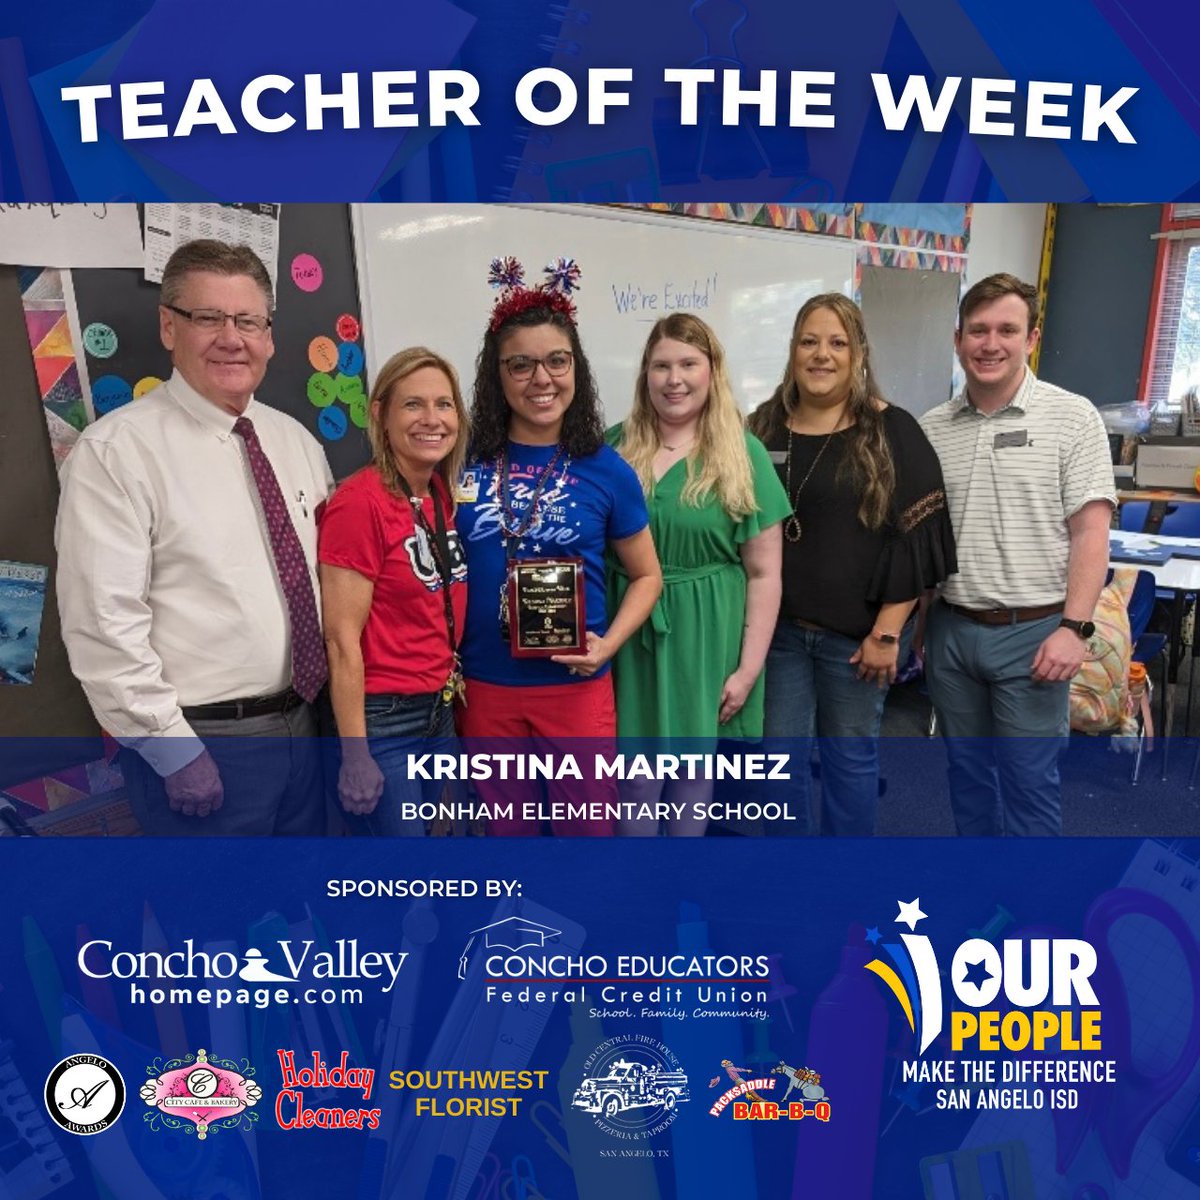 Congratulations to #DifferenceMaker Kristina Martinez of Bonham Elementary School on being named the Teacher of the Week by Concho Valley Homepage and Concho Educators Federal Credit Union! #OurPeopleMakeTheDifference